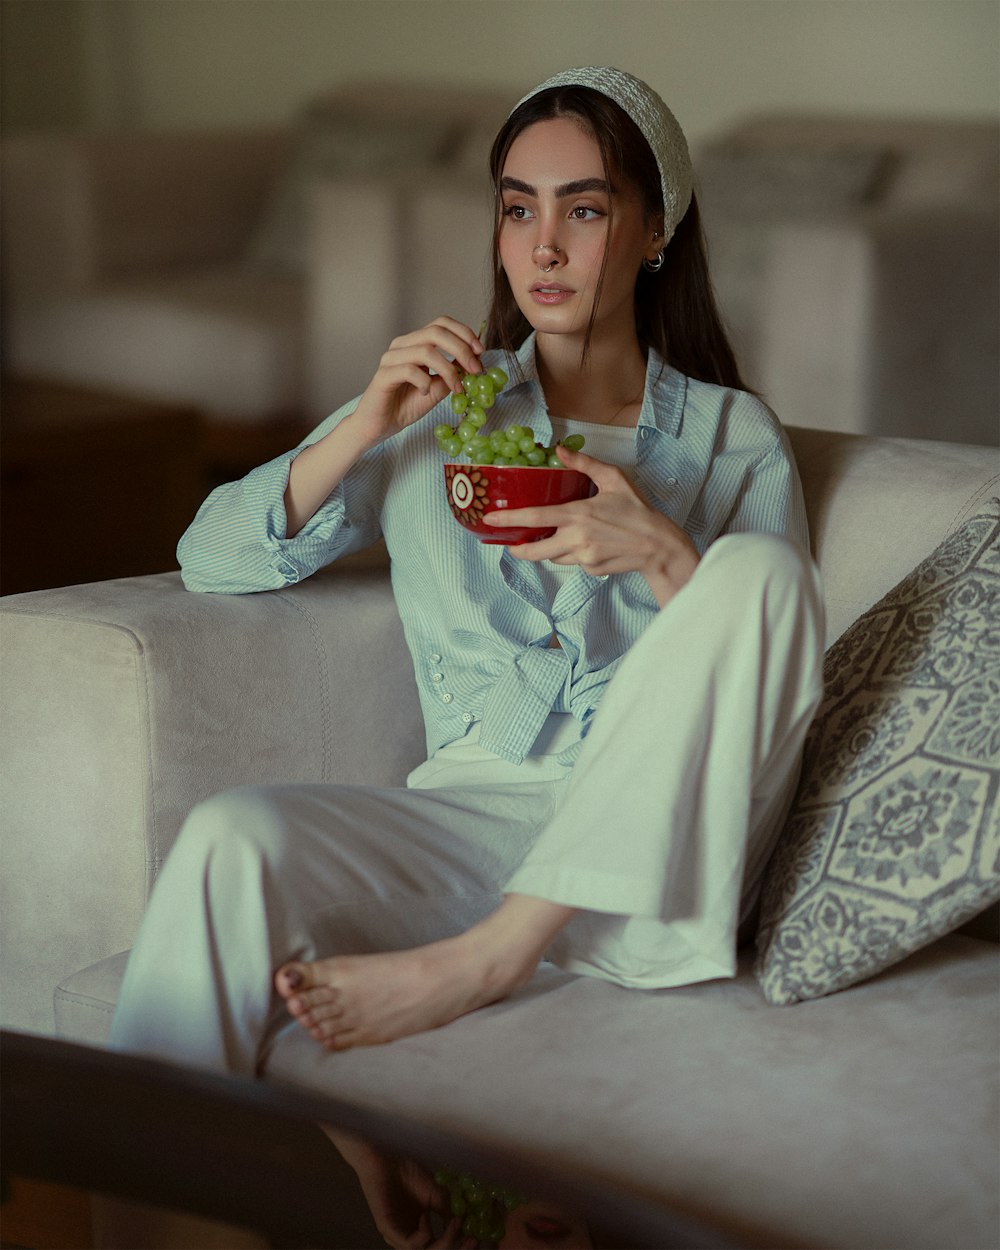 a woman sitting on a couch holding a bowl of grapes